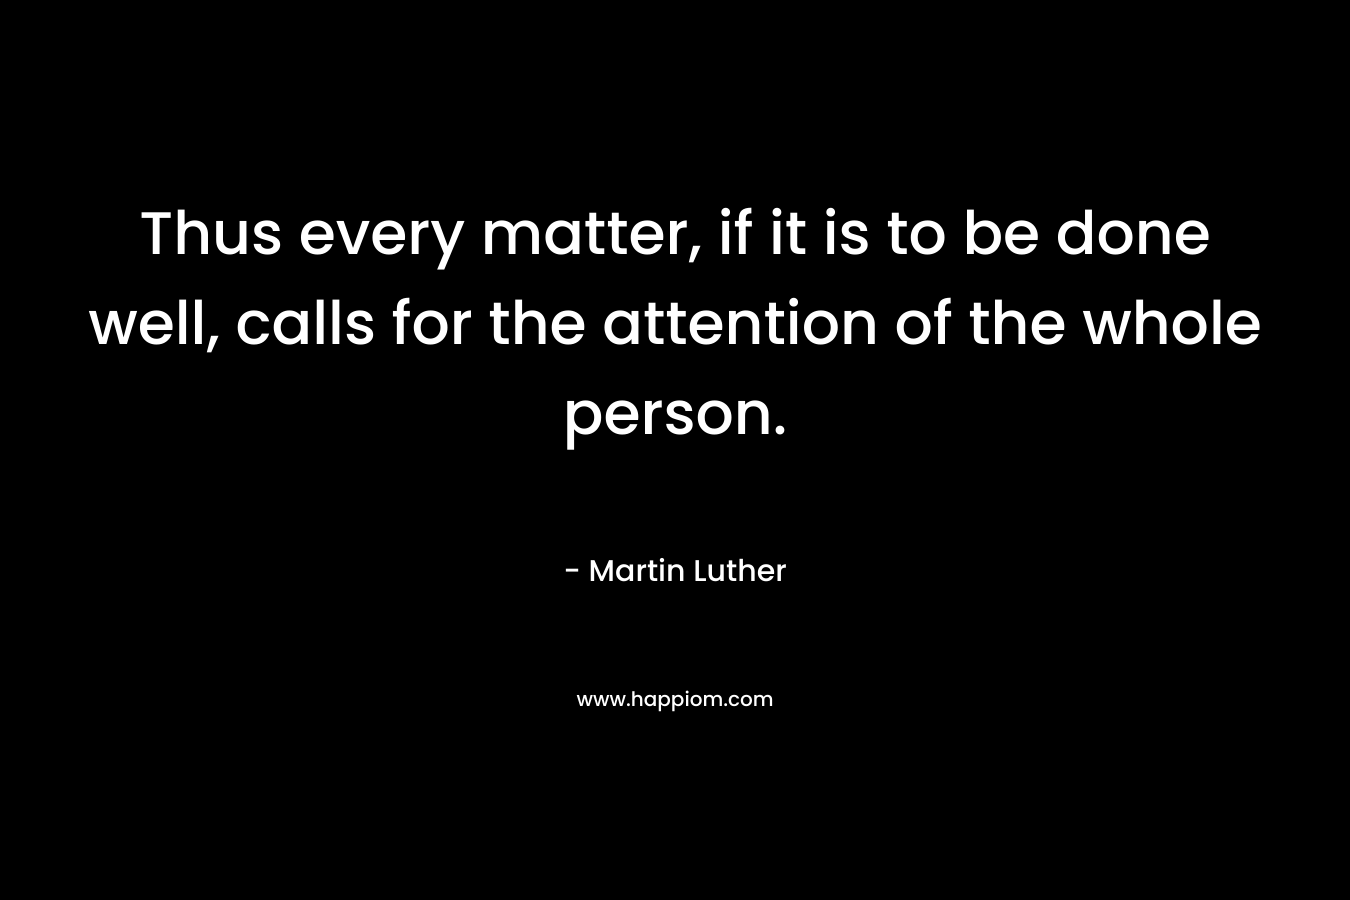 Thus every matter, if it is to be done well, calls for the attention of the whole person. – Martin Luther